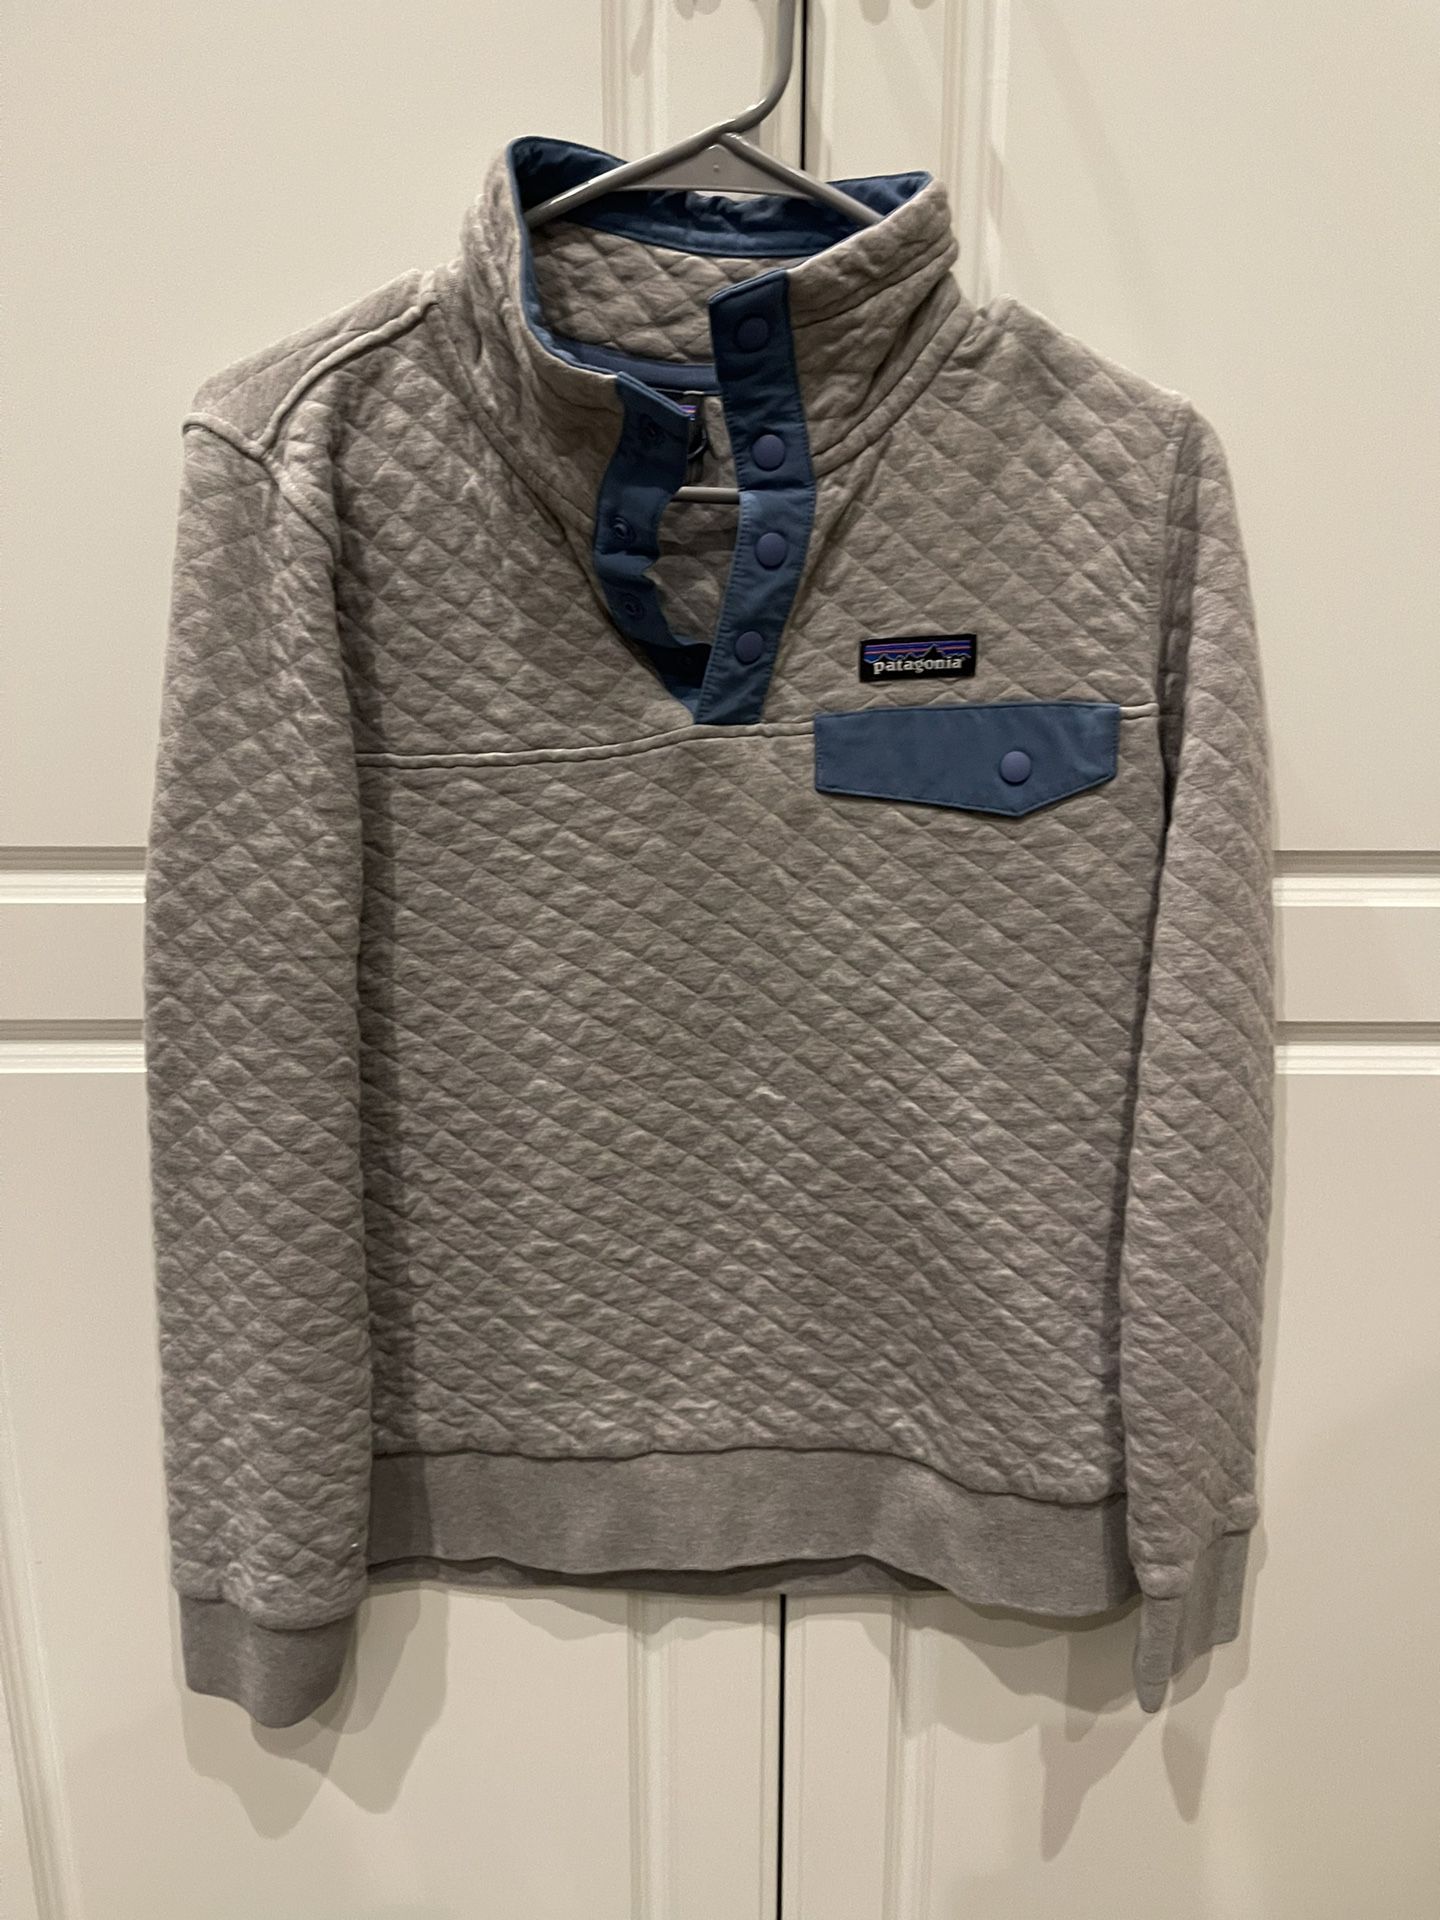 Women’s Patagonia Sweaters And Jackets